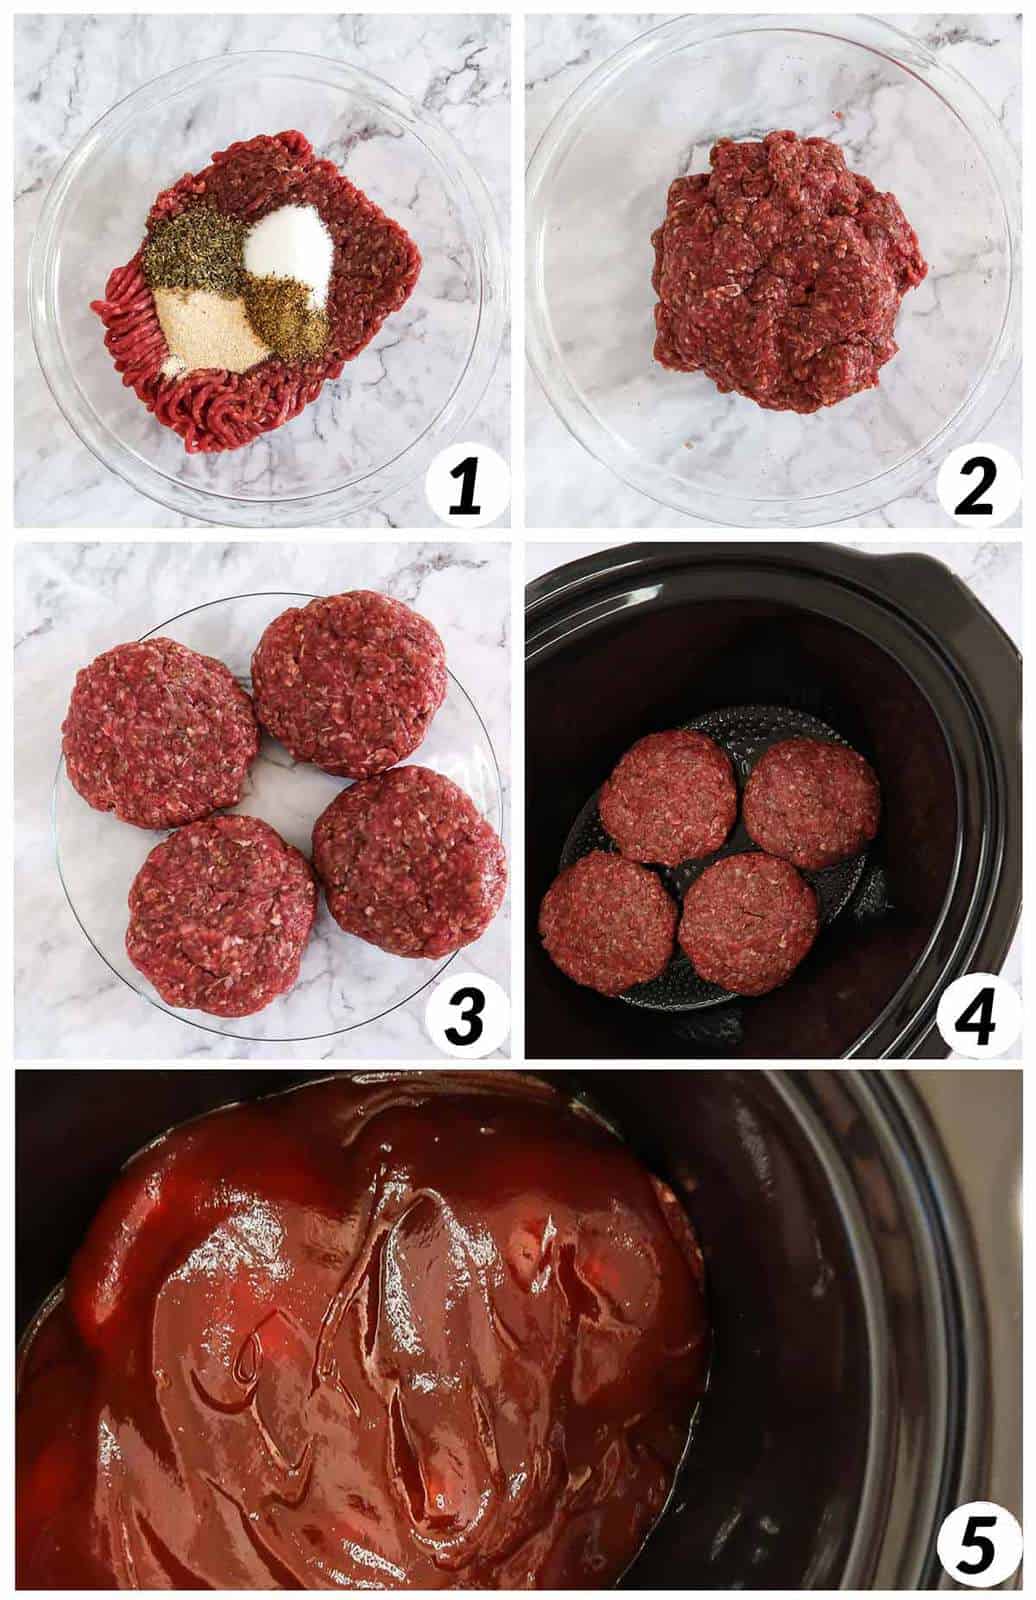 Five panel grid of process shots 1-5 - combining ingredients for burger patty, placing in crock pot, and covering with barbecue sauce.